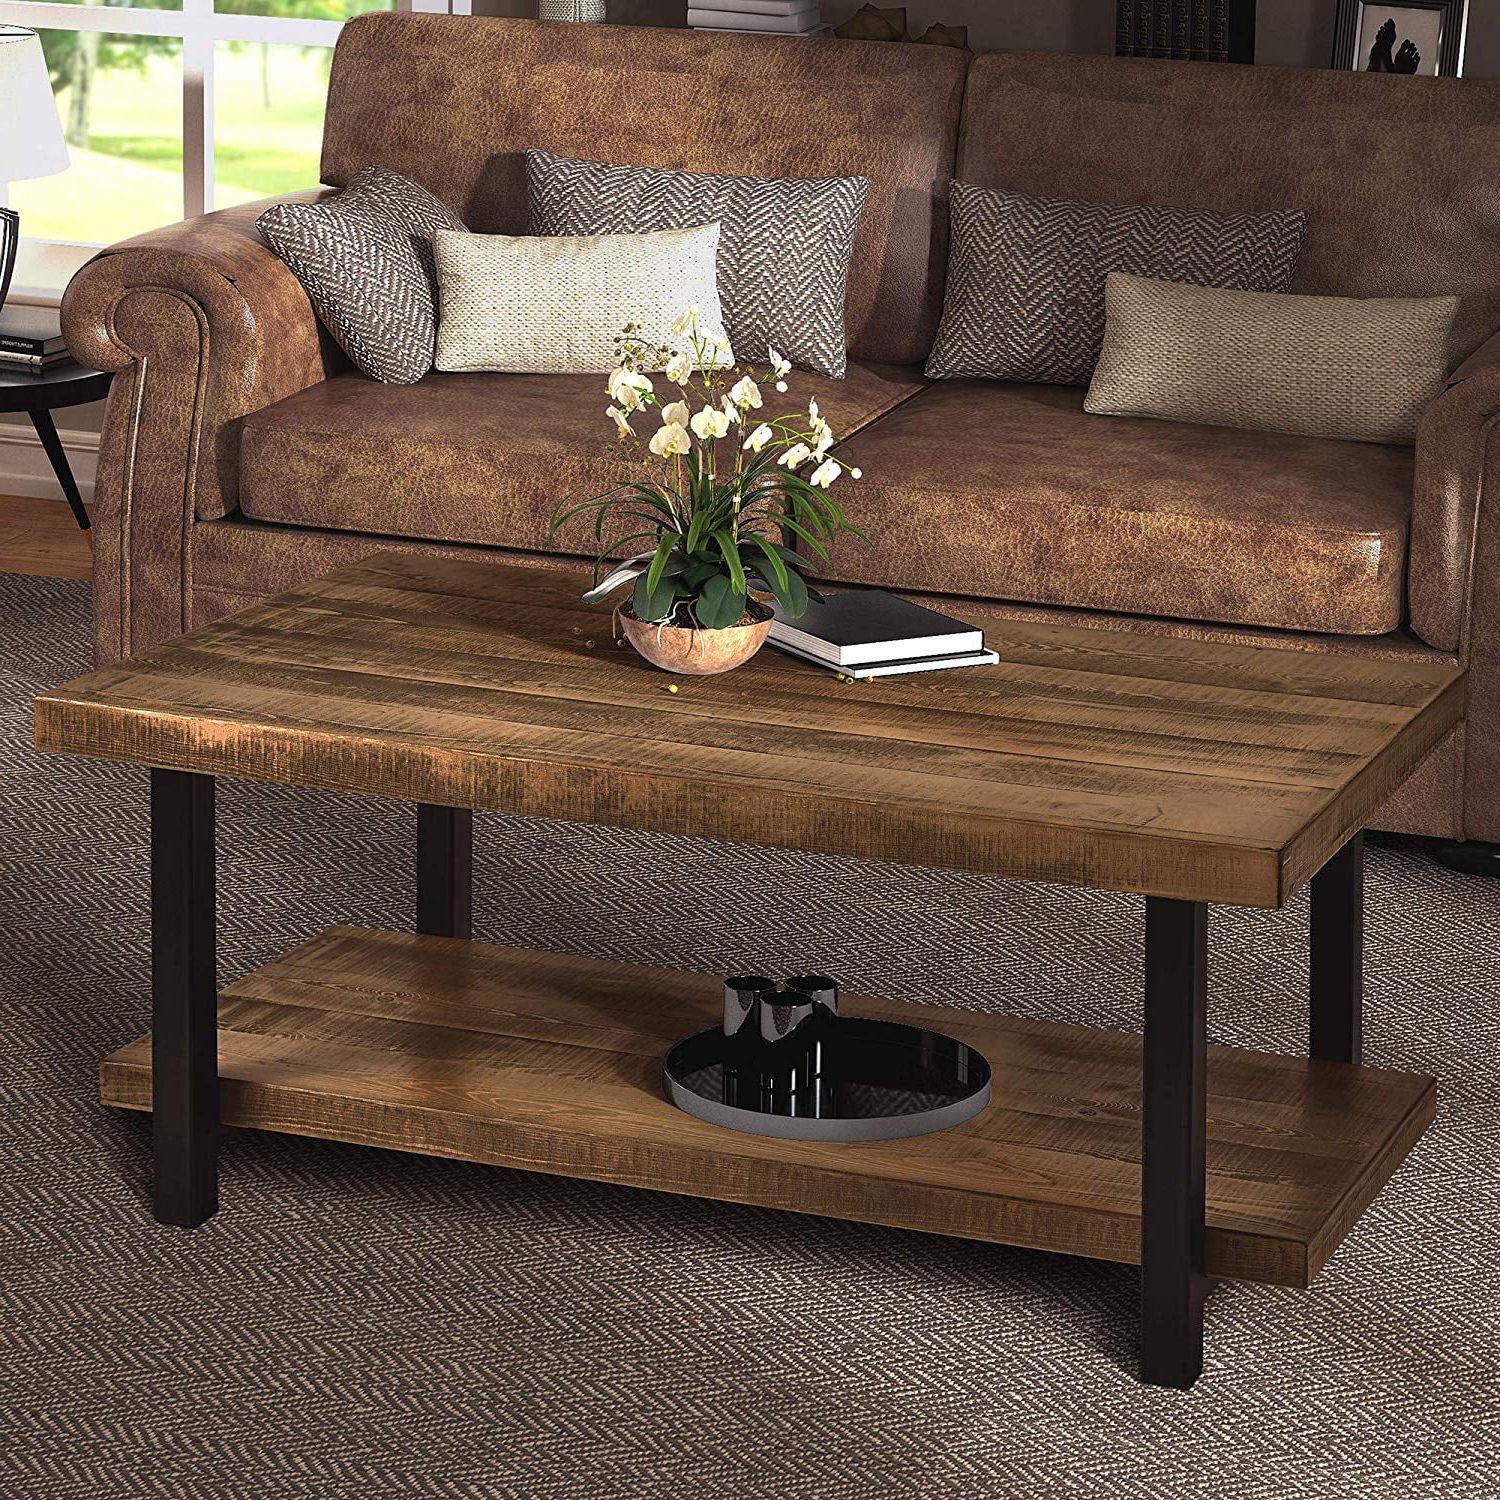 Popular Rustic Coffee Tables Pertaining To Harper&bright Designs Industrial Rectangular Pine Wood Coffee Table (View 8 of 15)